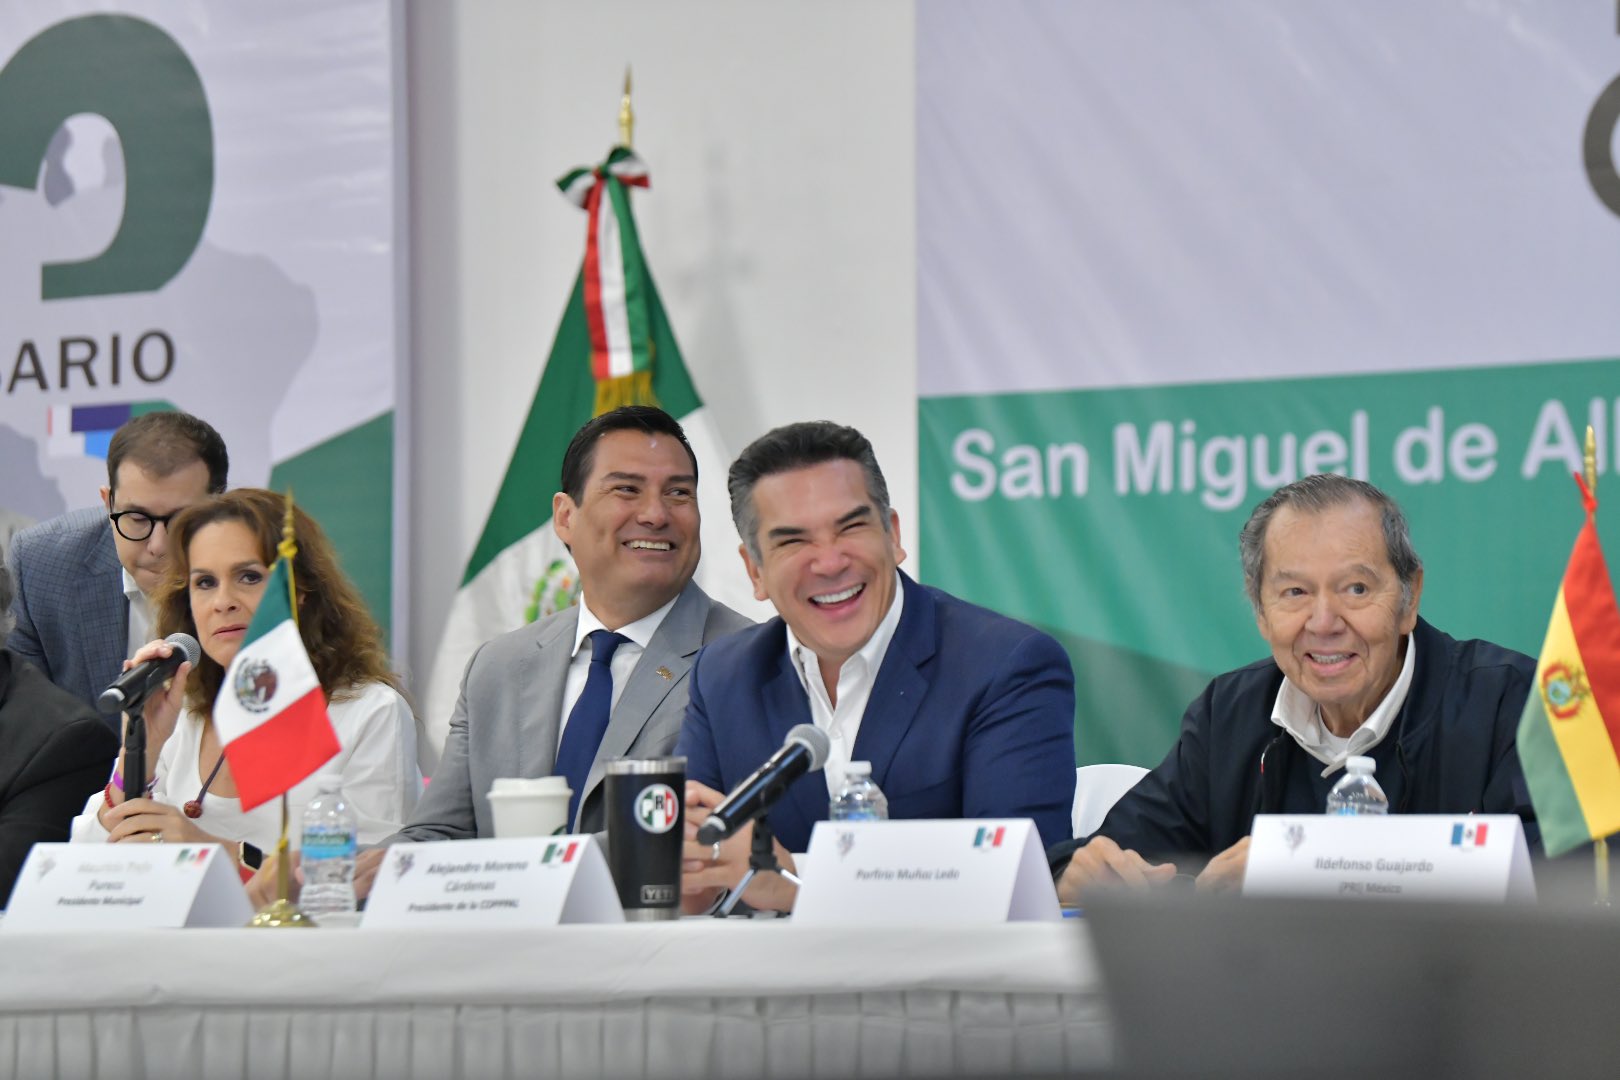 The former PRI member was present with some pictures of the tricolor at the meeting of the Political Parties of Latin America Photo: Twitter/@alitomorenoc)